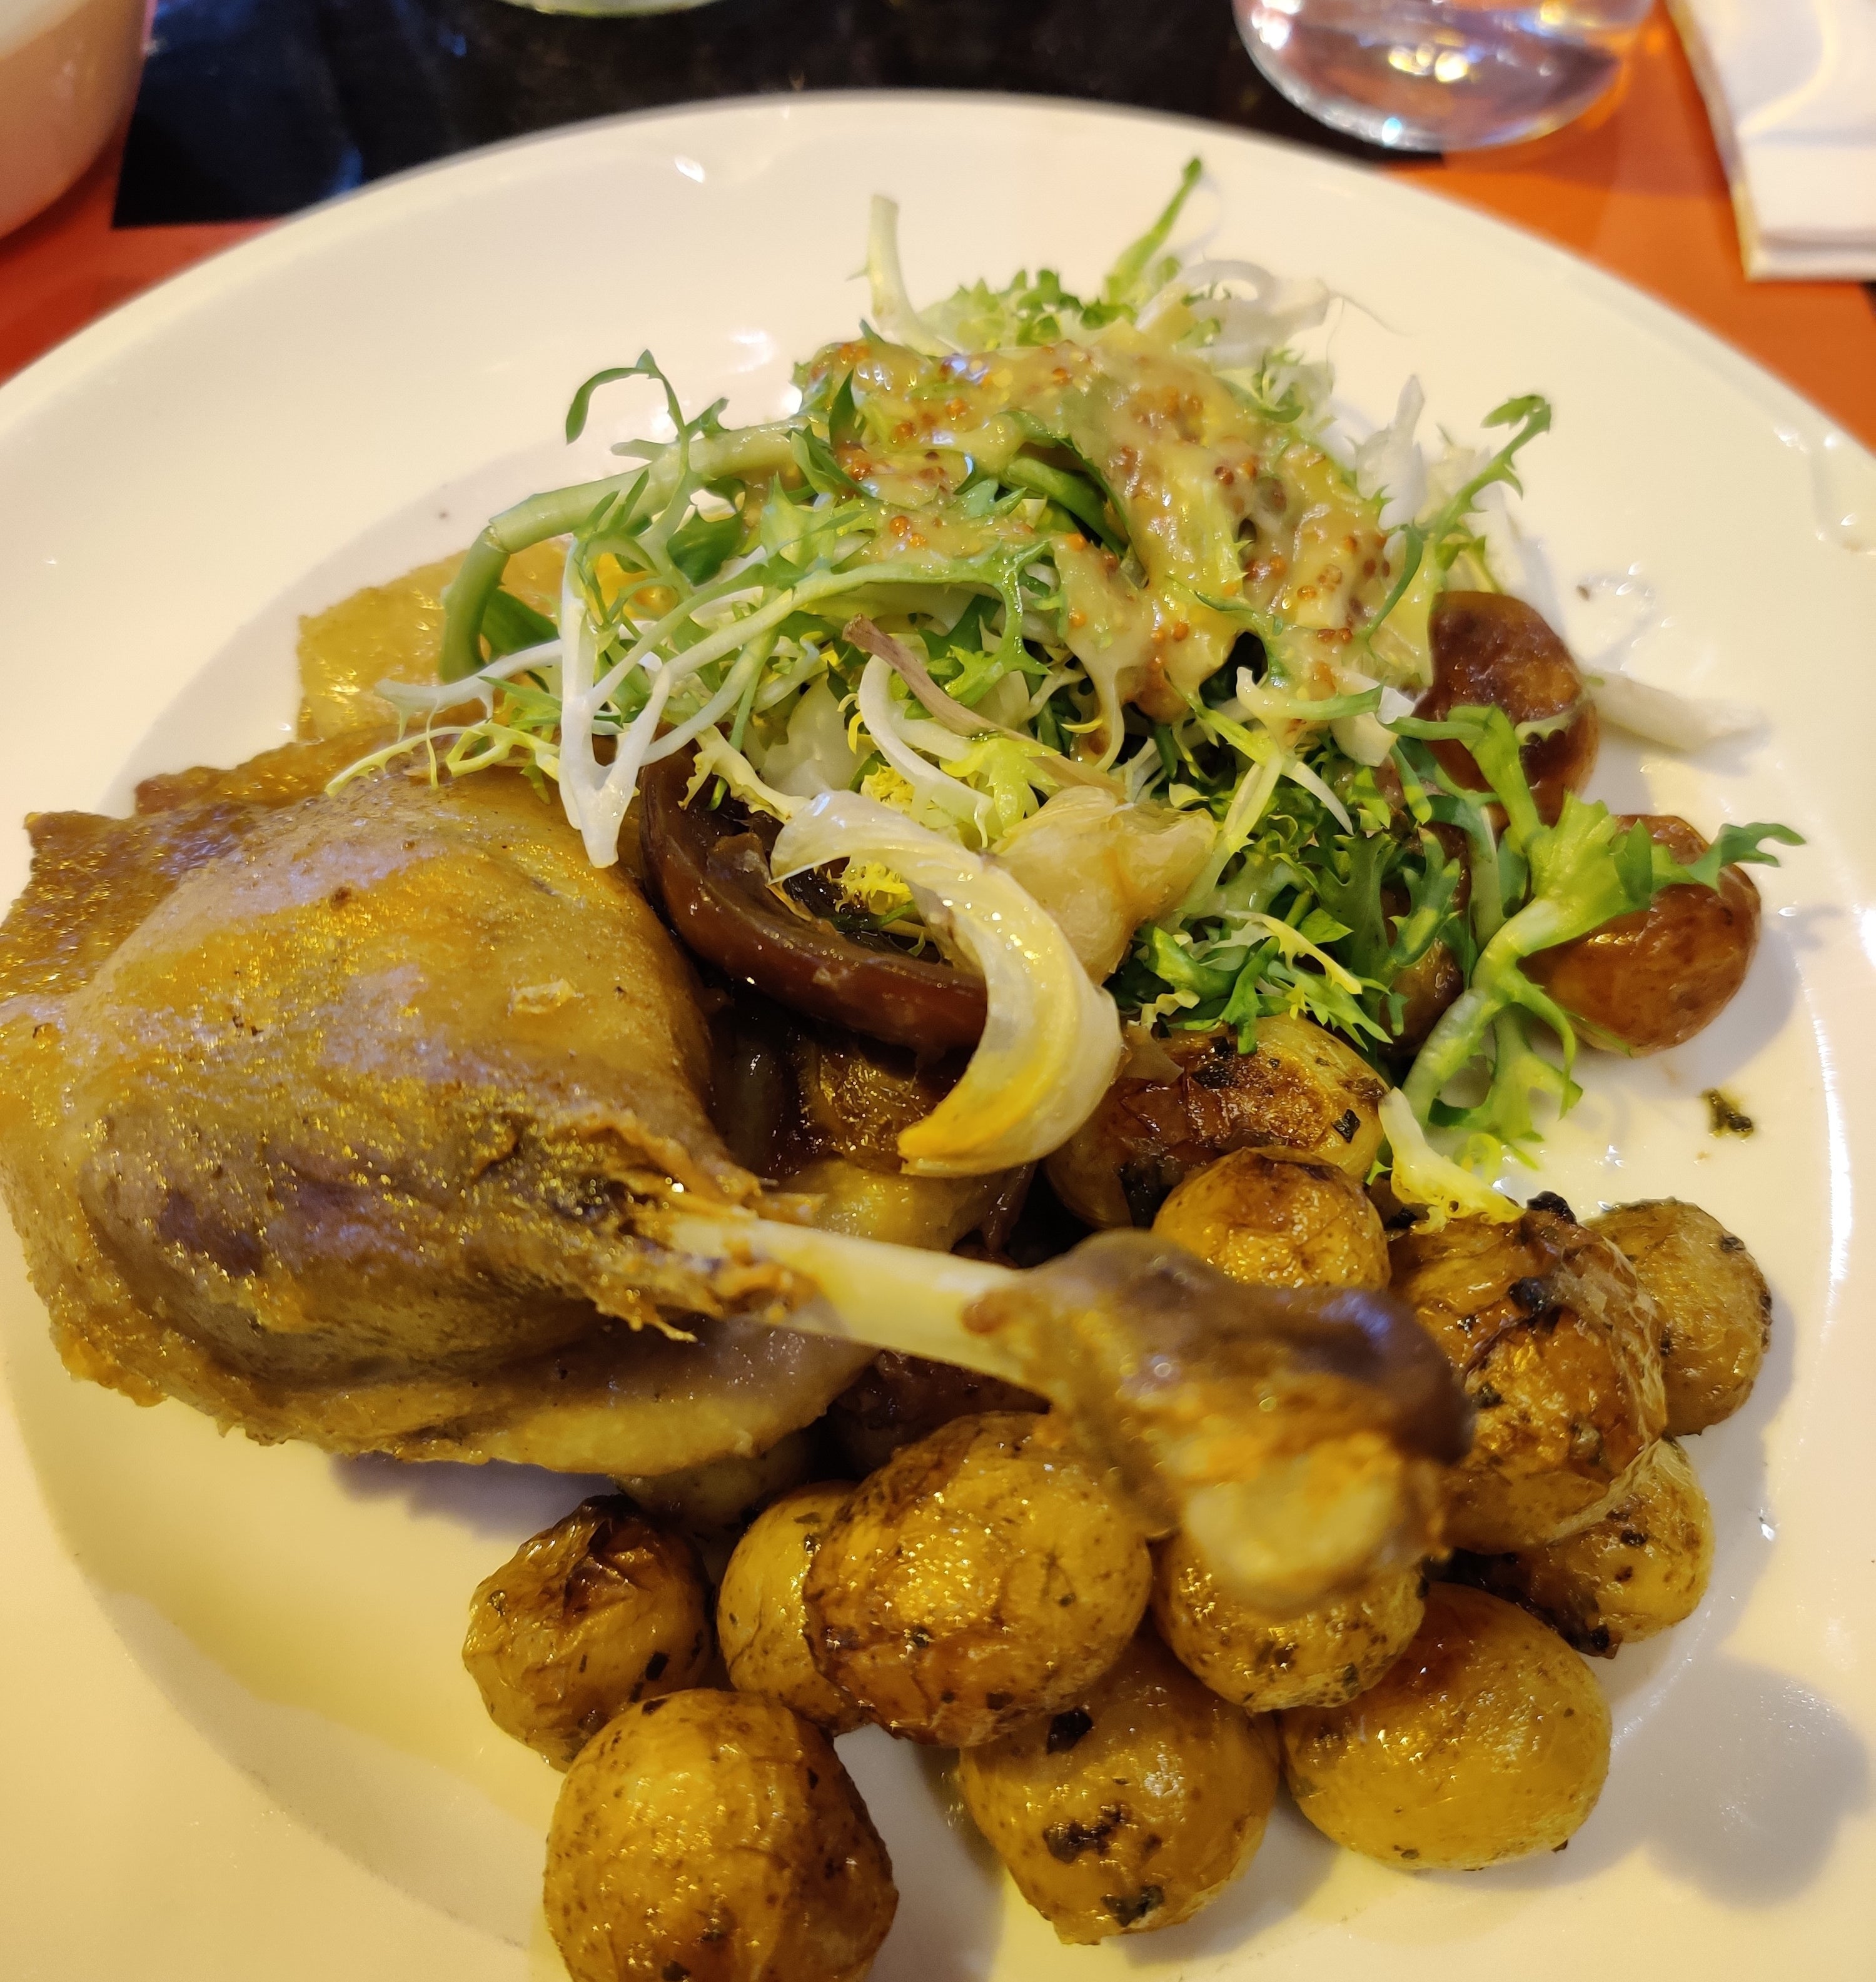 A plate of duck confit served with crispy baby potatoes, frisée salad, grilled mushrooms, and drizzled with a mustard dressing